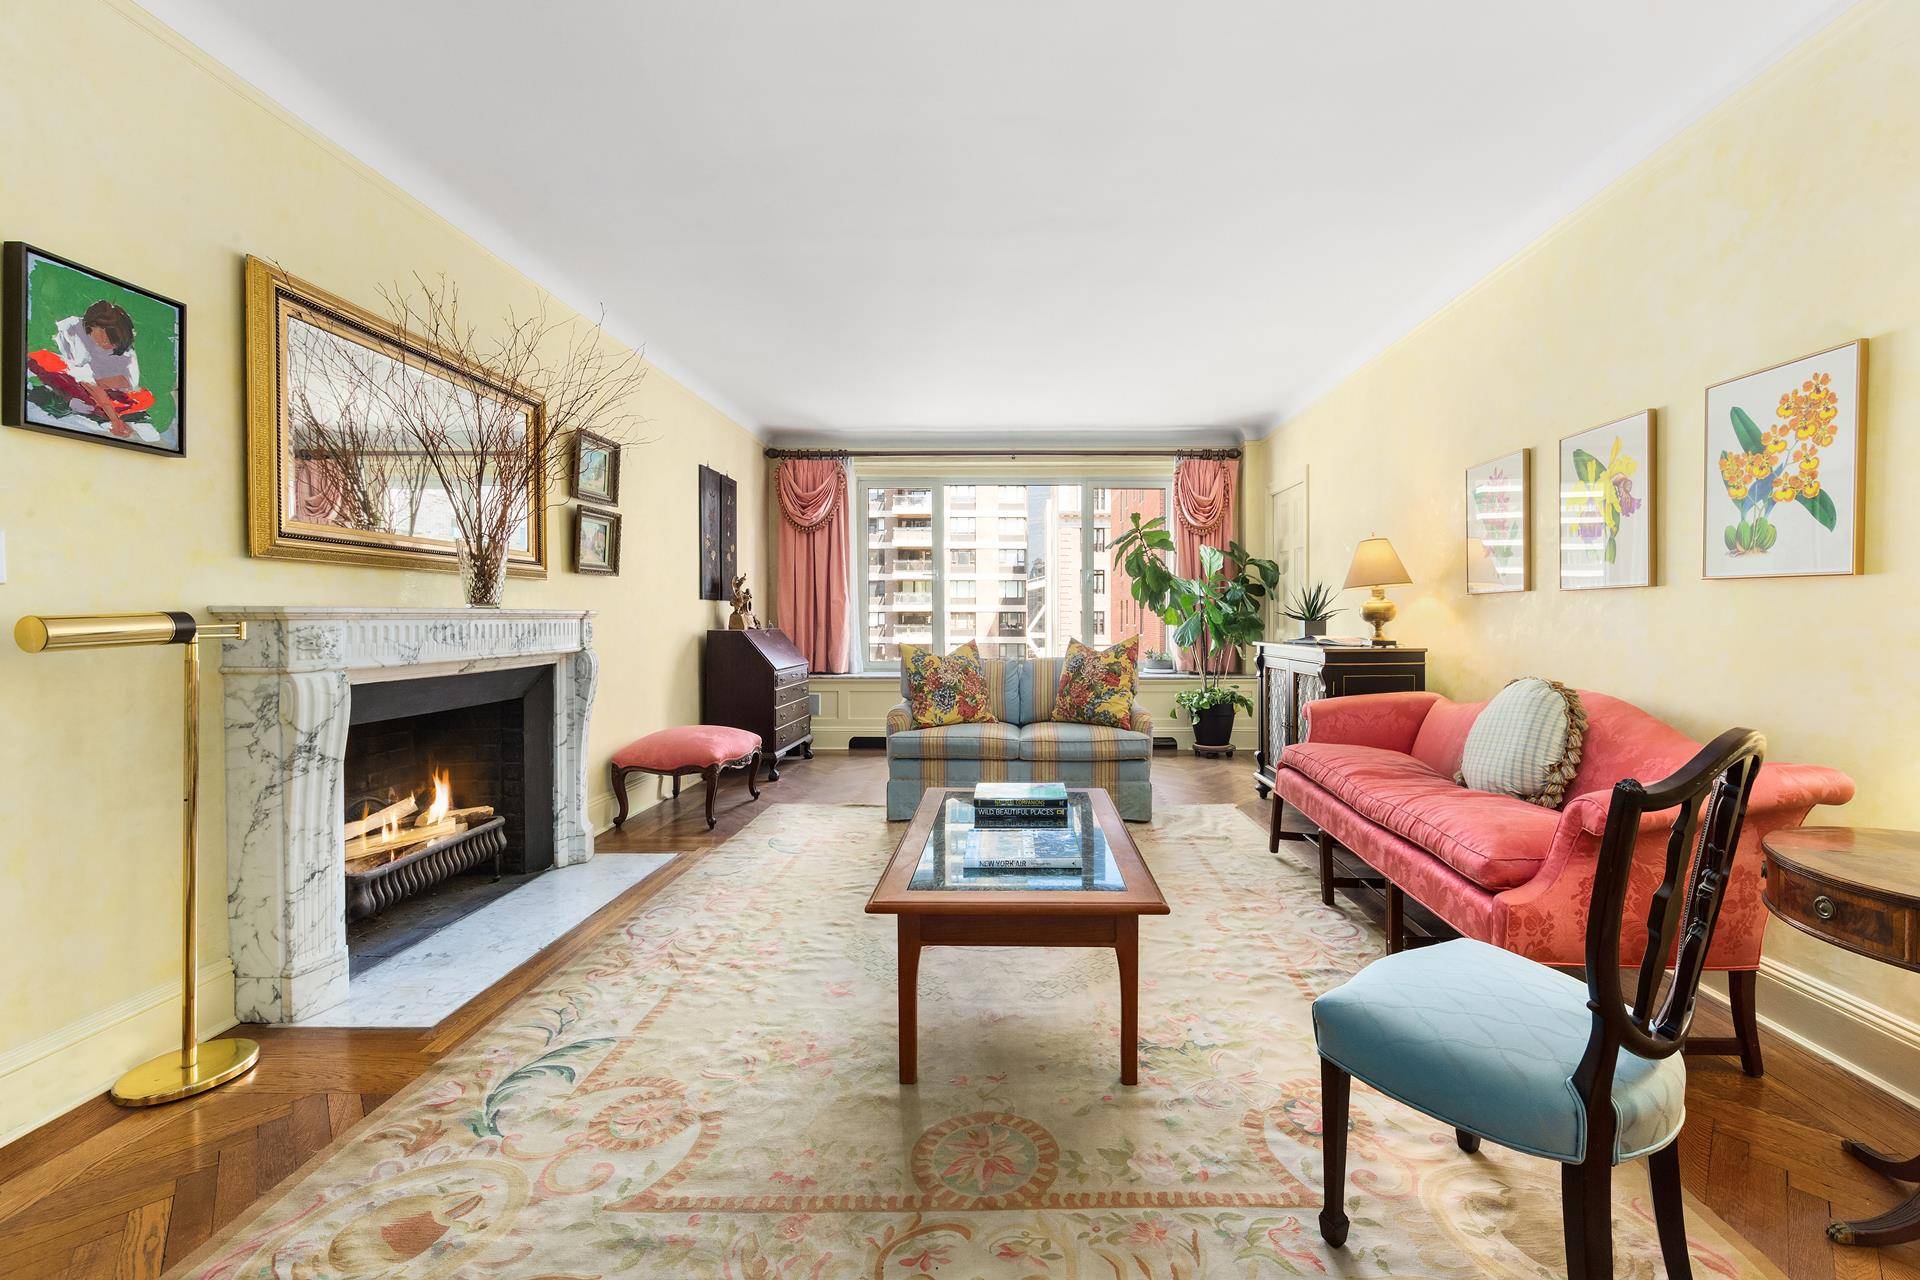 Introducing 455 East 57th Street 12D this magnificent 3 bedroom flex 4 bedroom, 3 bathroom residence is the epitome of prewar elegance, tucked away in the East River enclave of ...